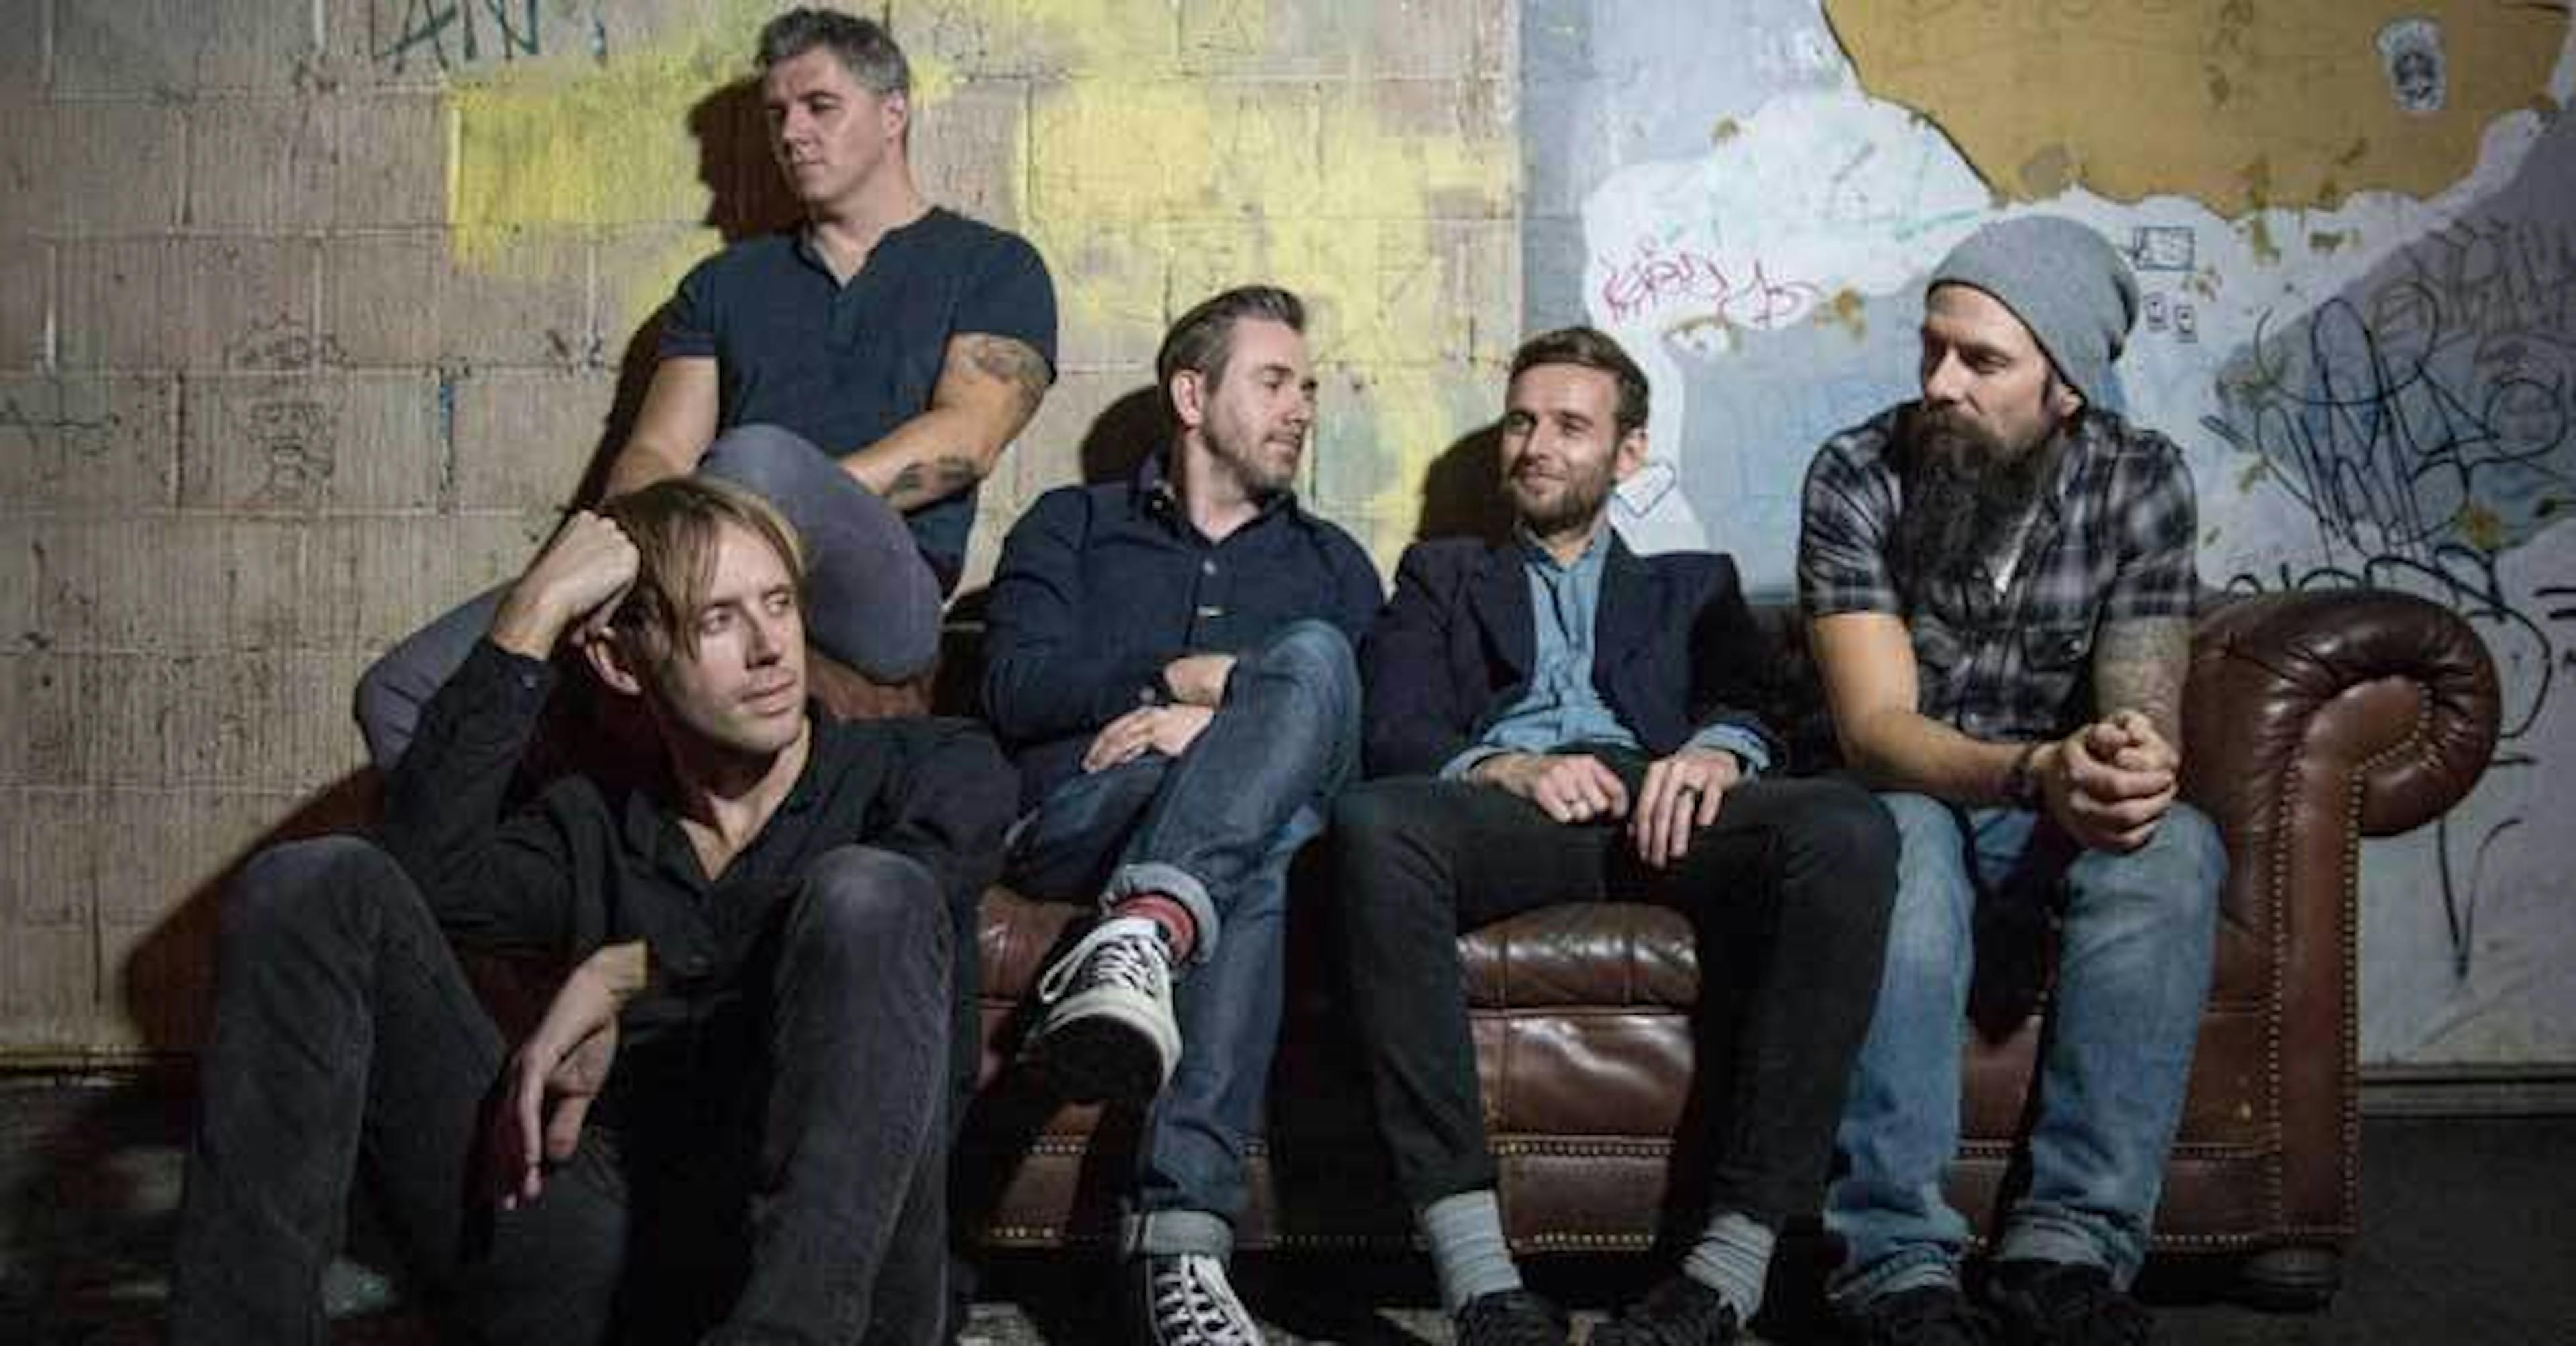 Watch No Devotion Perform On A Rooftop In Germany